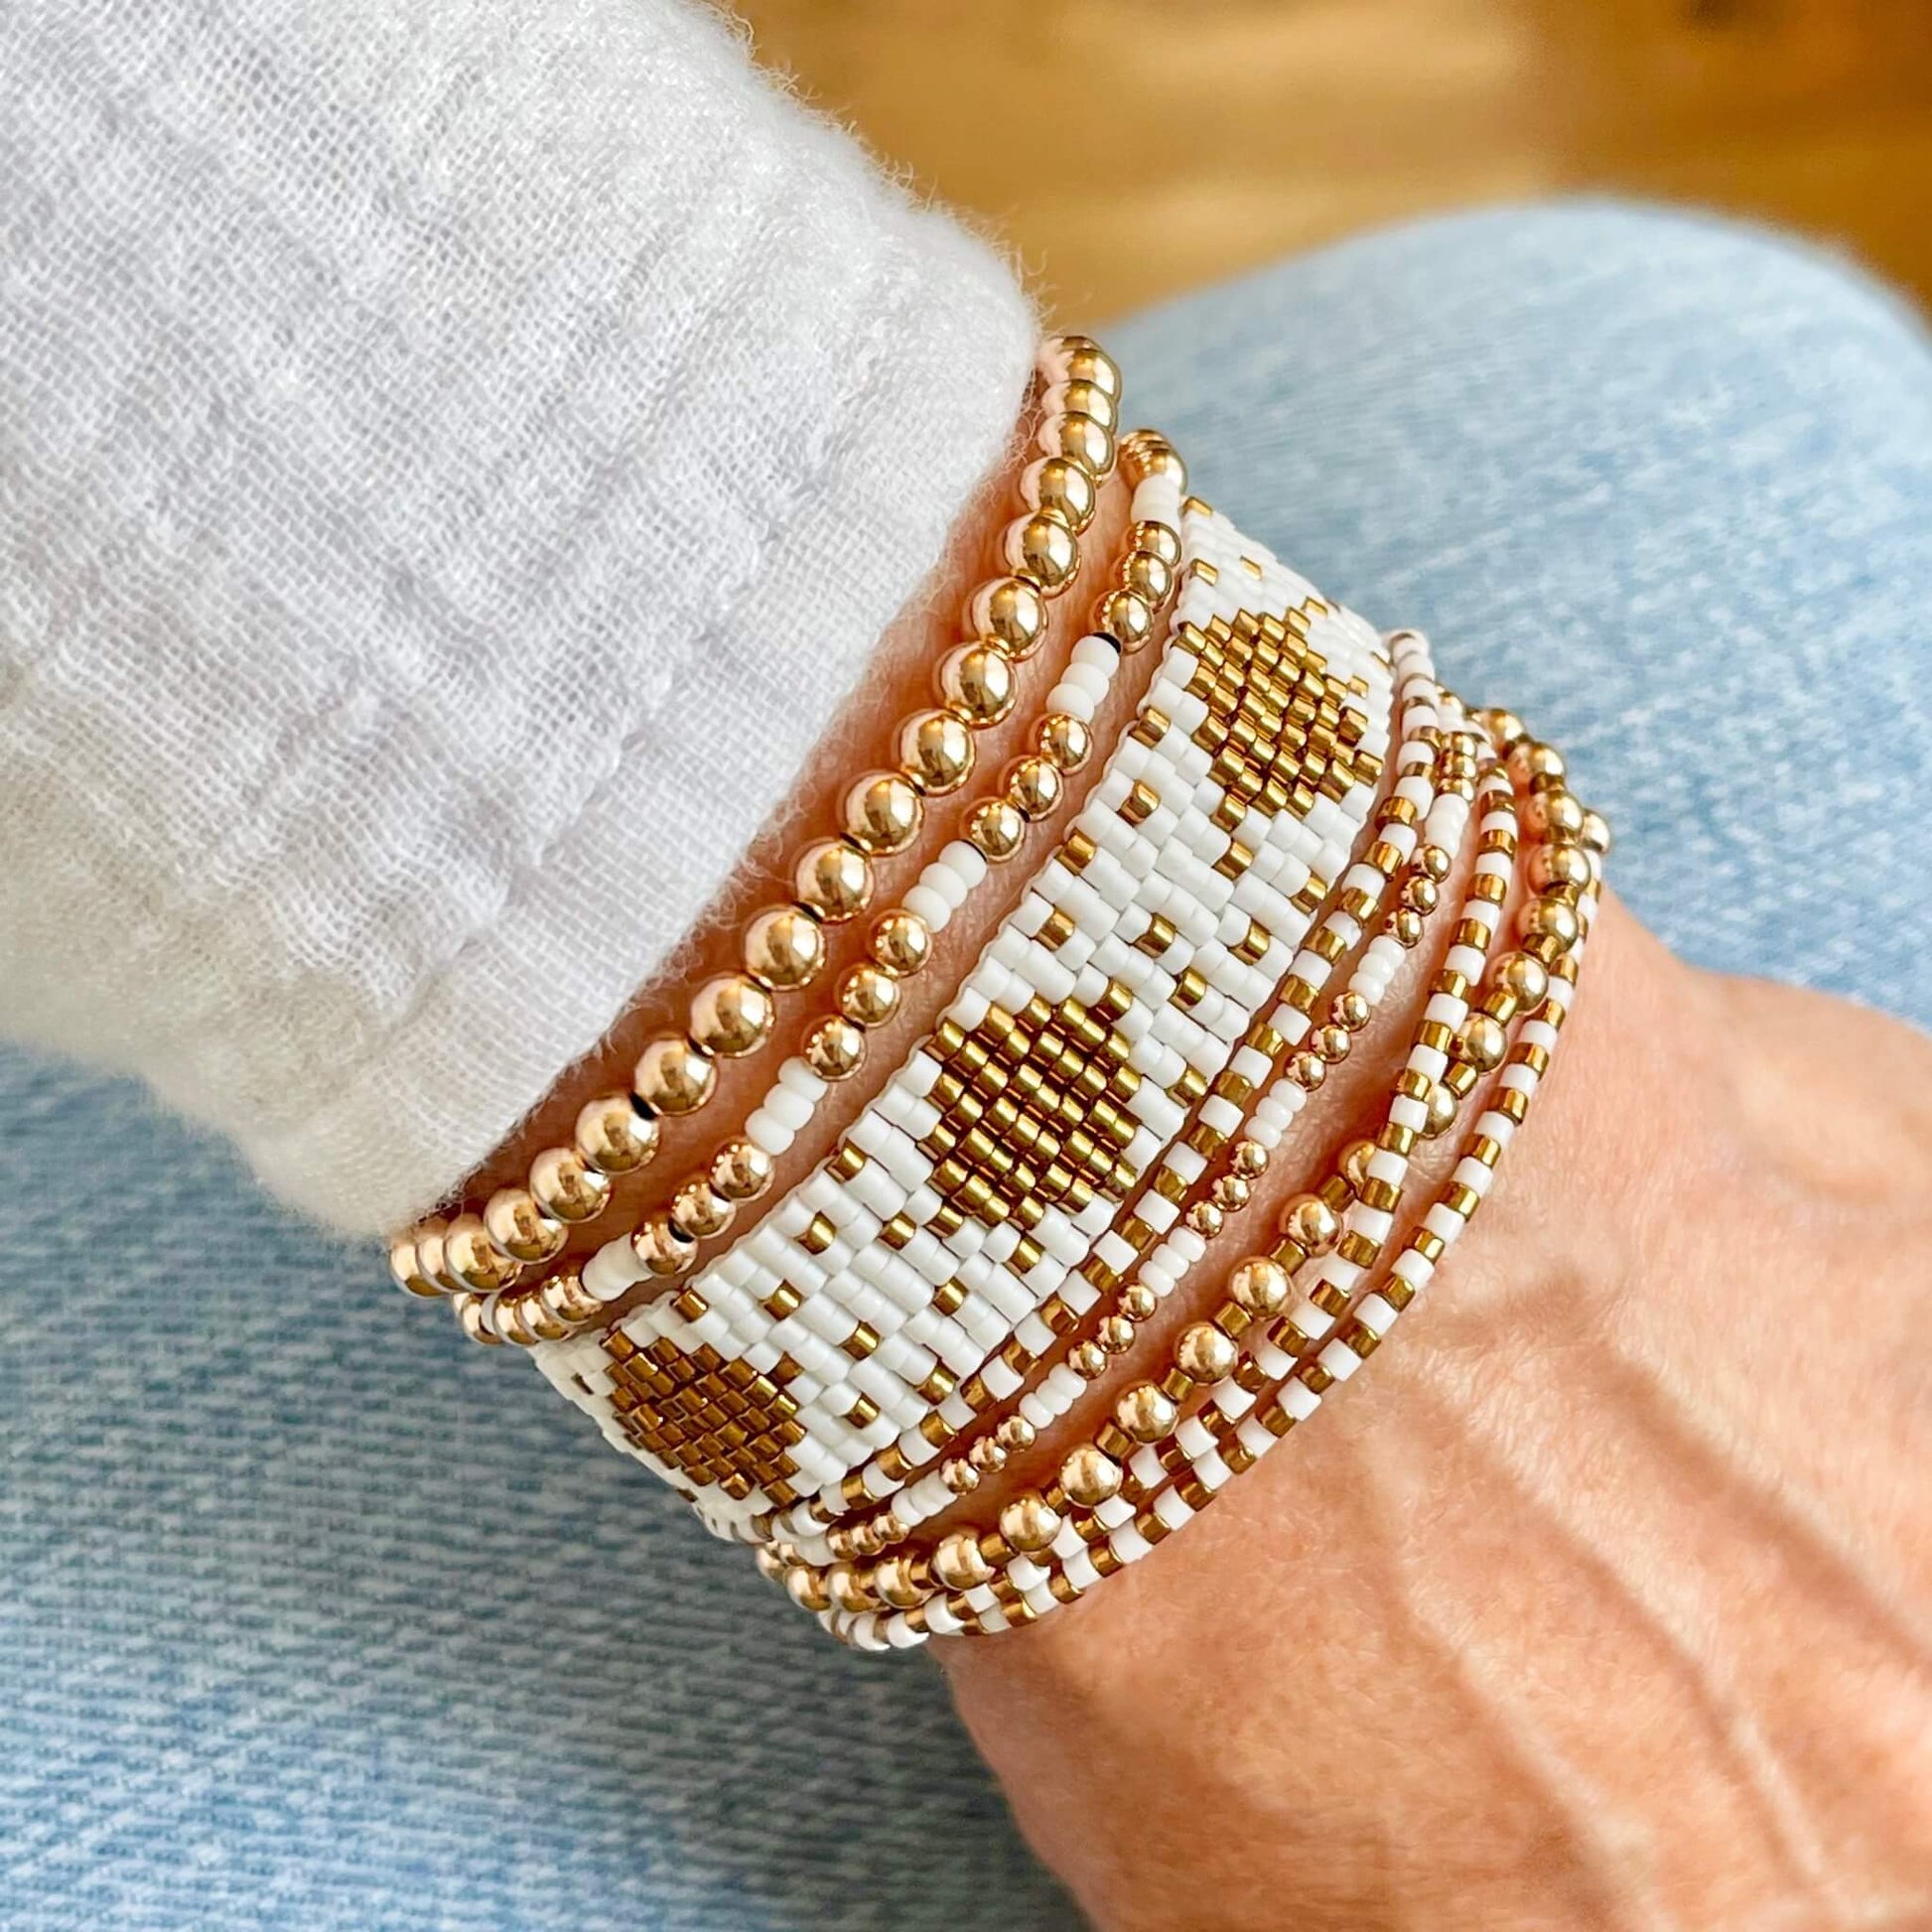 White bracelets with a handwoven seed bead cuff and wrap, and 14K rose gold filled stretch bracelets.